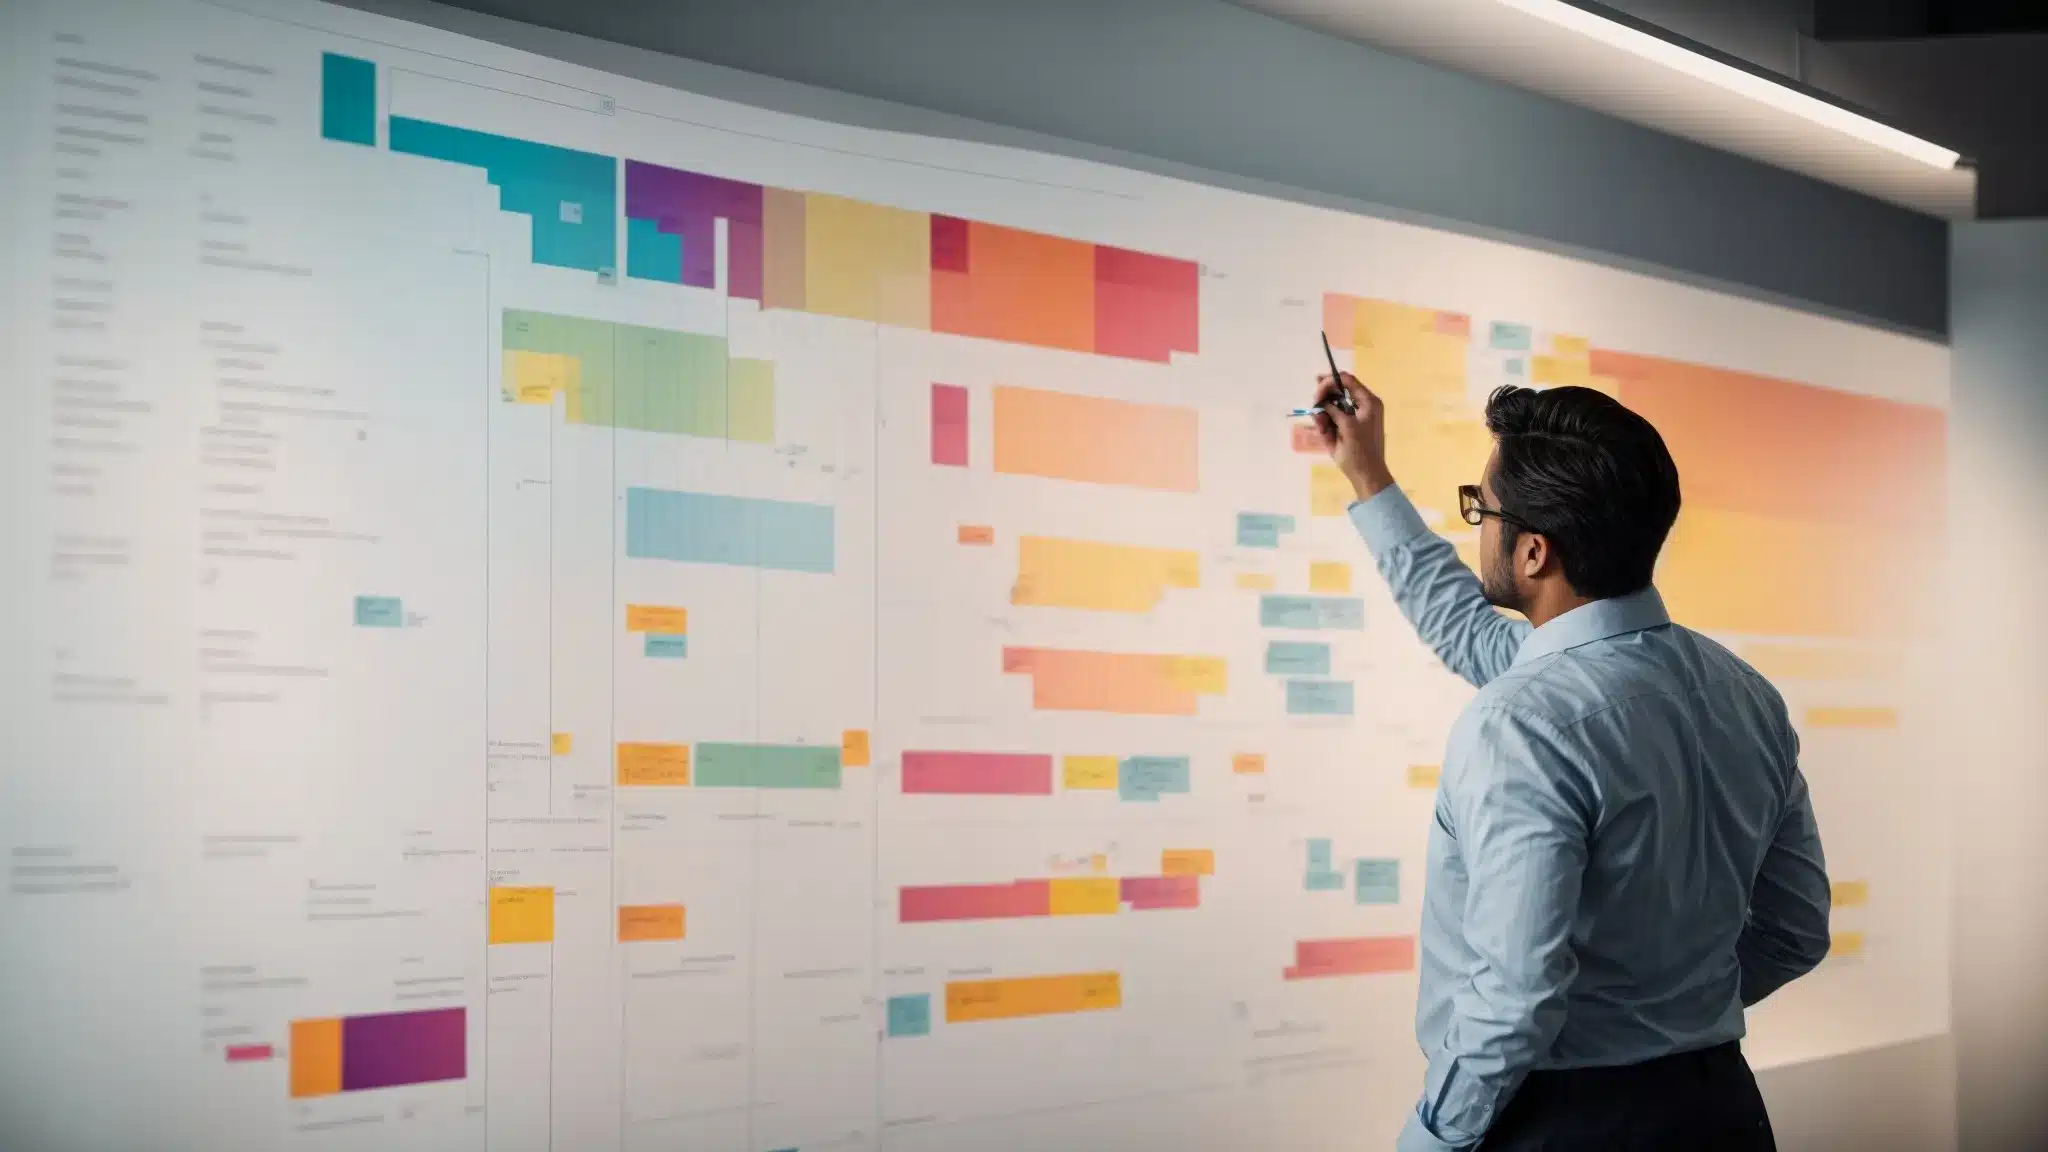 A Marketer Points At A Colorful Chart On A Wall During A Creative Brainstorming Session In A Modern Office.